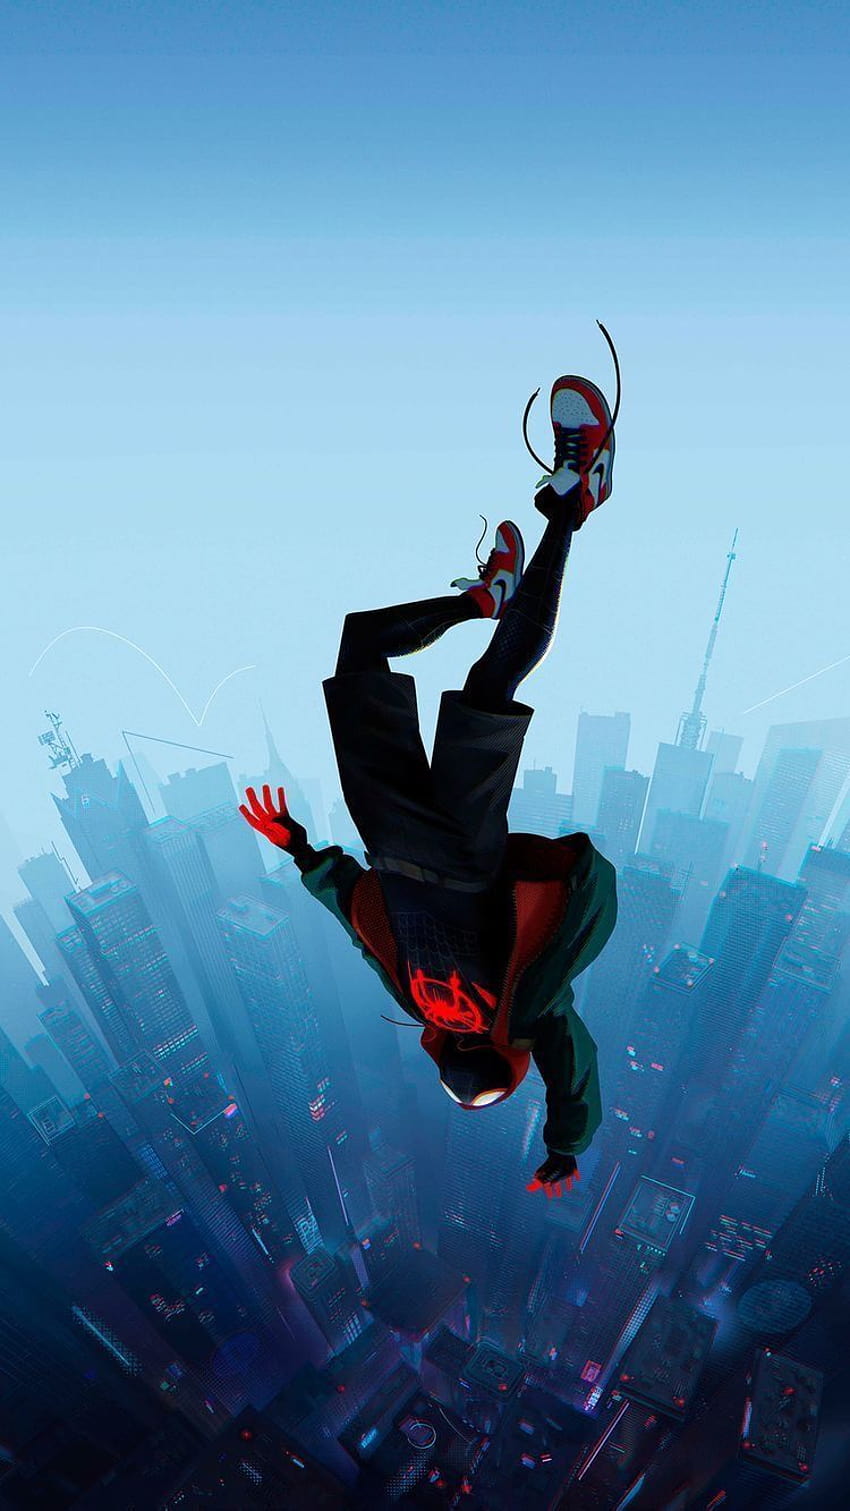 Leap Faith Spider Man Into The Spider Verse, lompatan iman wallpaper ponsel HD